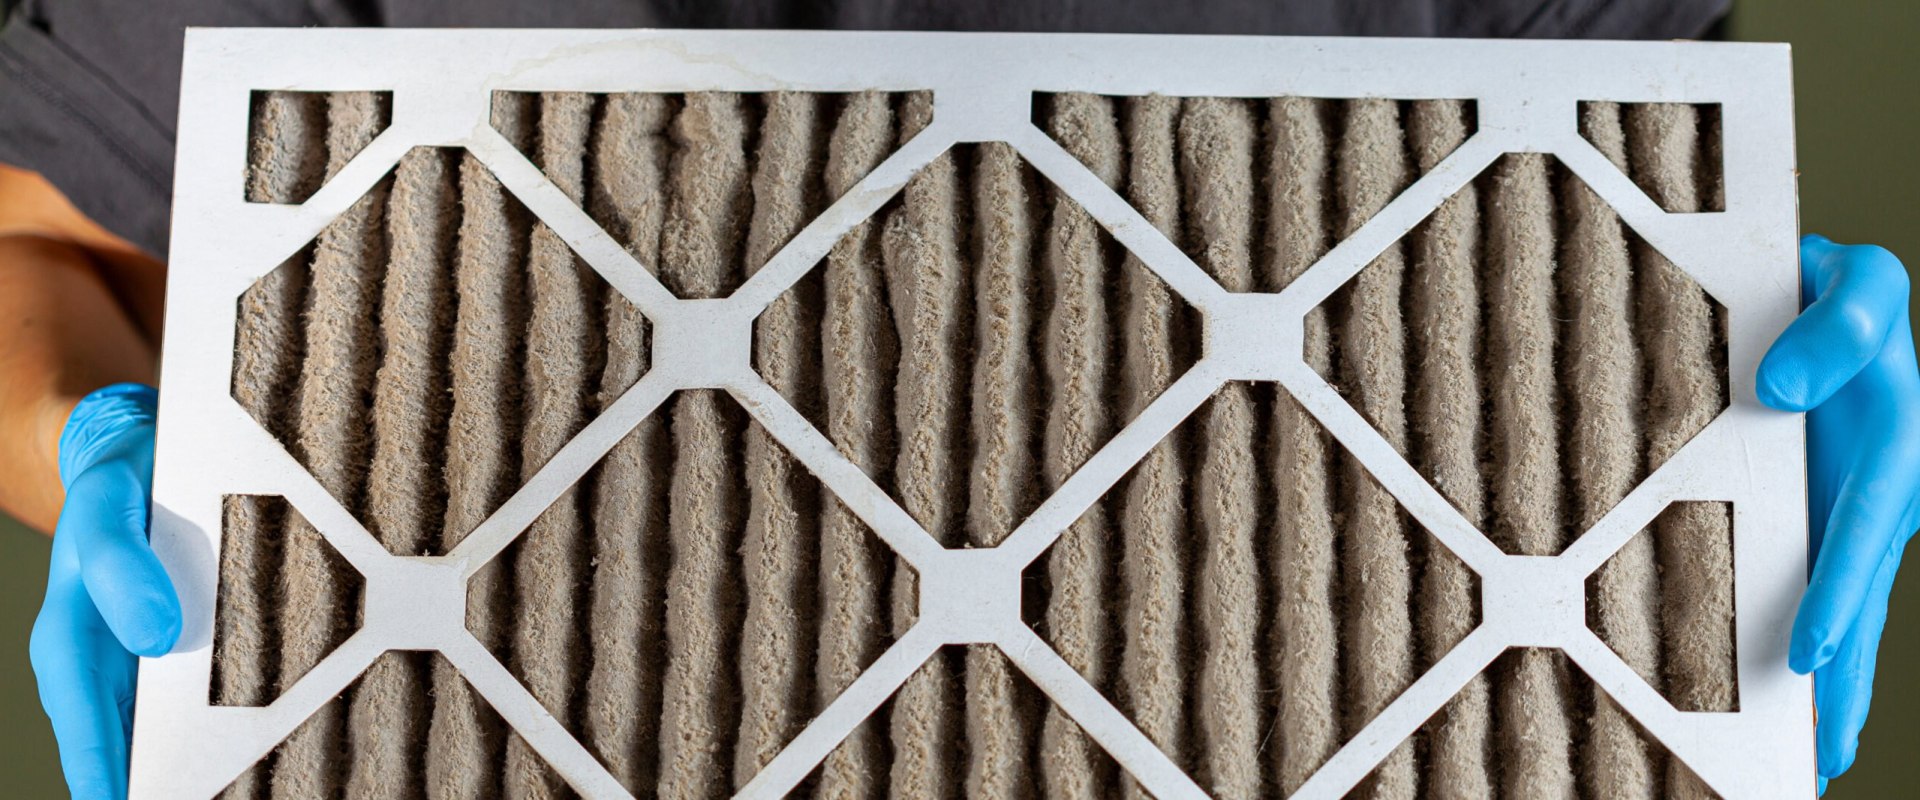 The Best HVAC Filters Recommended by Experts